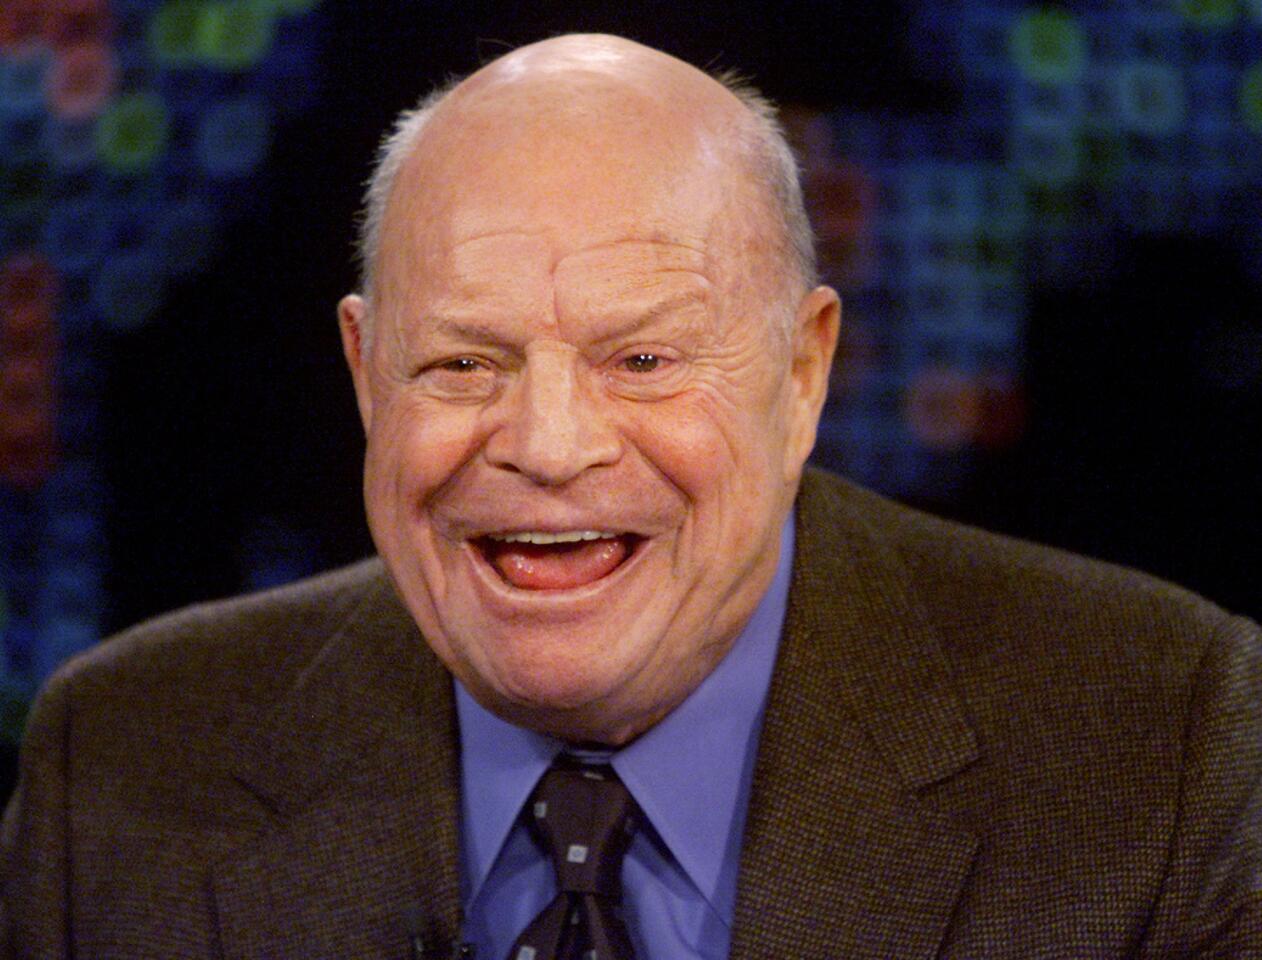 Abrasive comic Don Rickles, honorary Rat Pack member and celebrity roast guest whose career spanned six decades, died on April 6, 2017, in Los Angeles. He was 90. Read more.